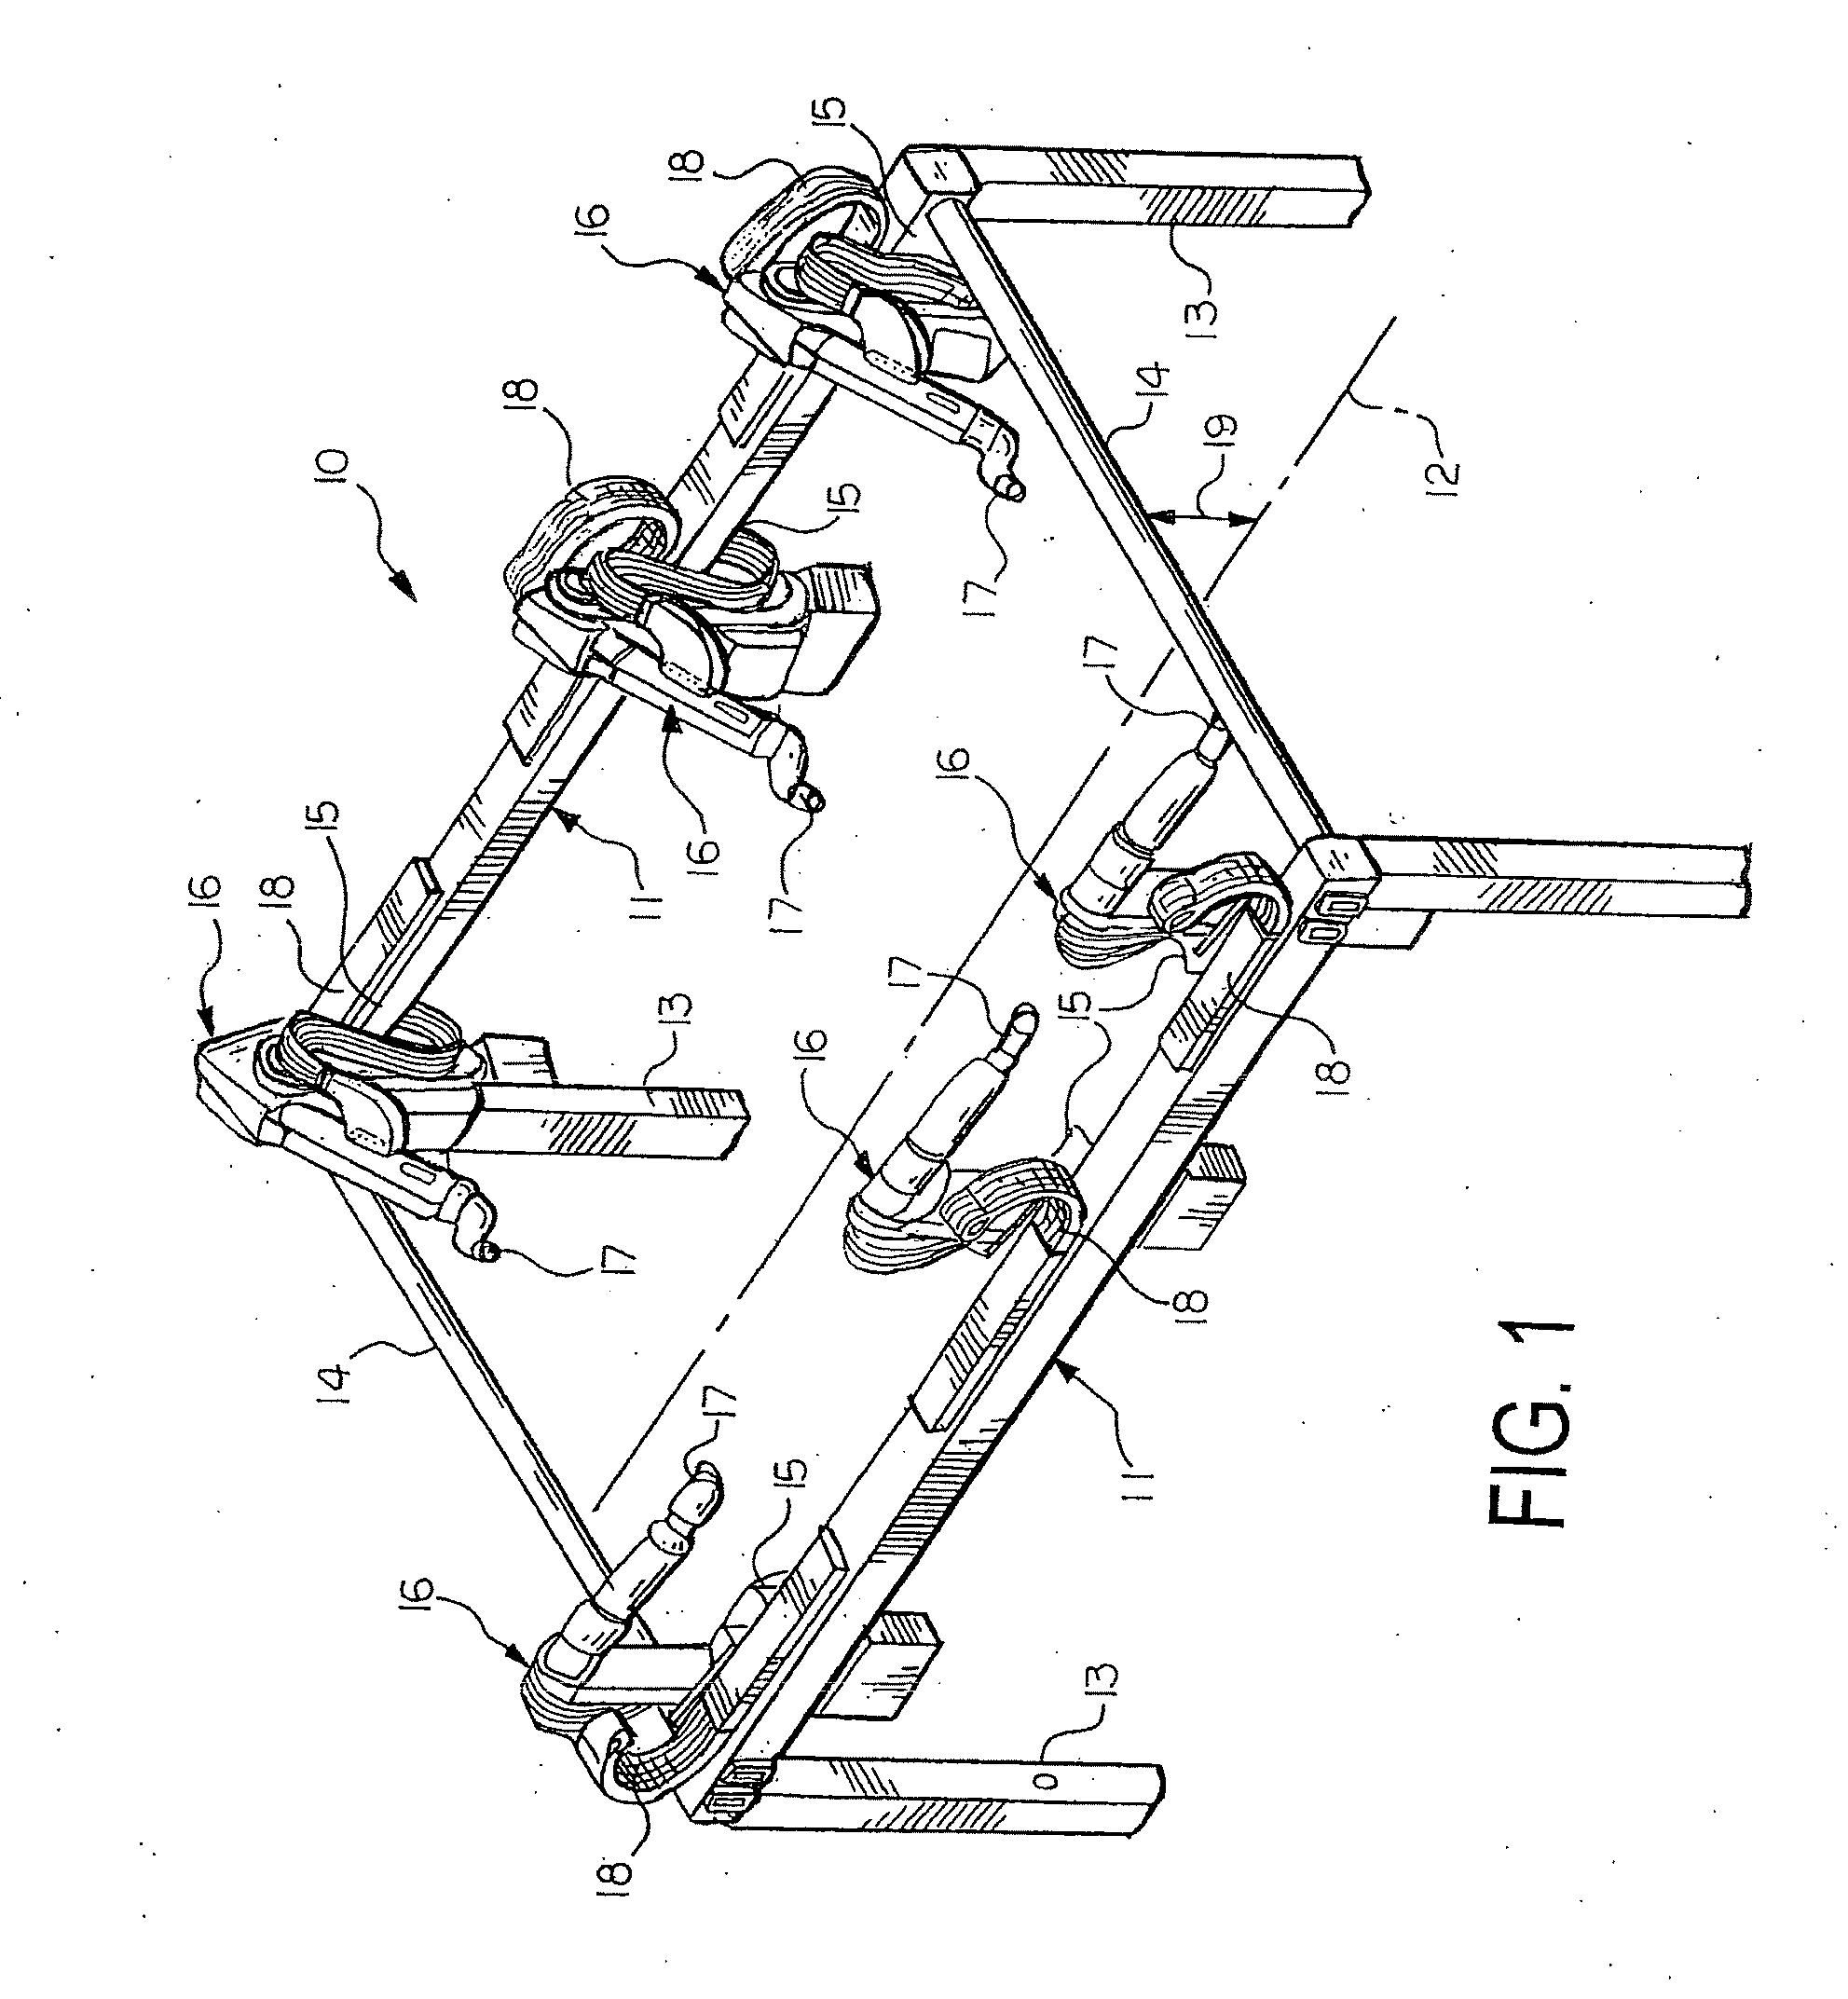 Robotic apparatus with non-conductive wrist for painting